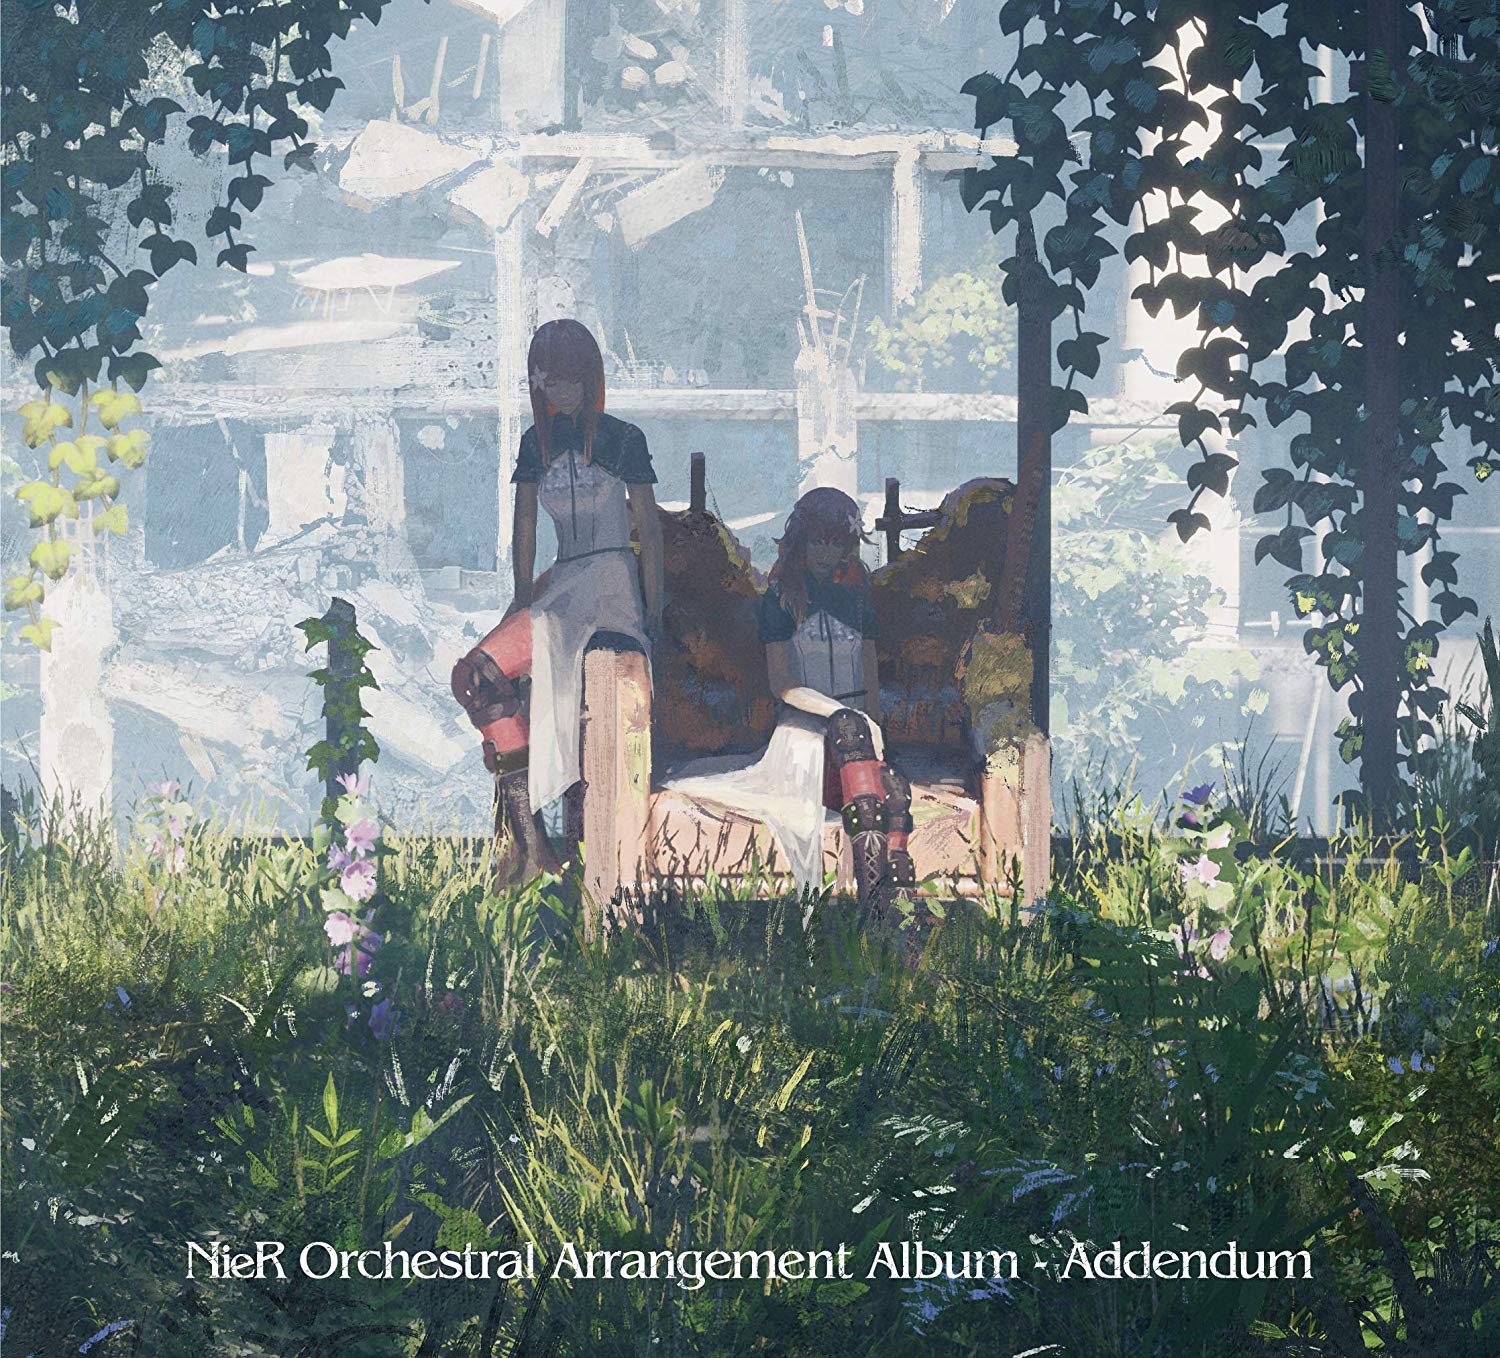 VGMO -Video Game Music Online- » New NieR Orchestral Album tracklist and  details released